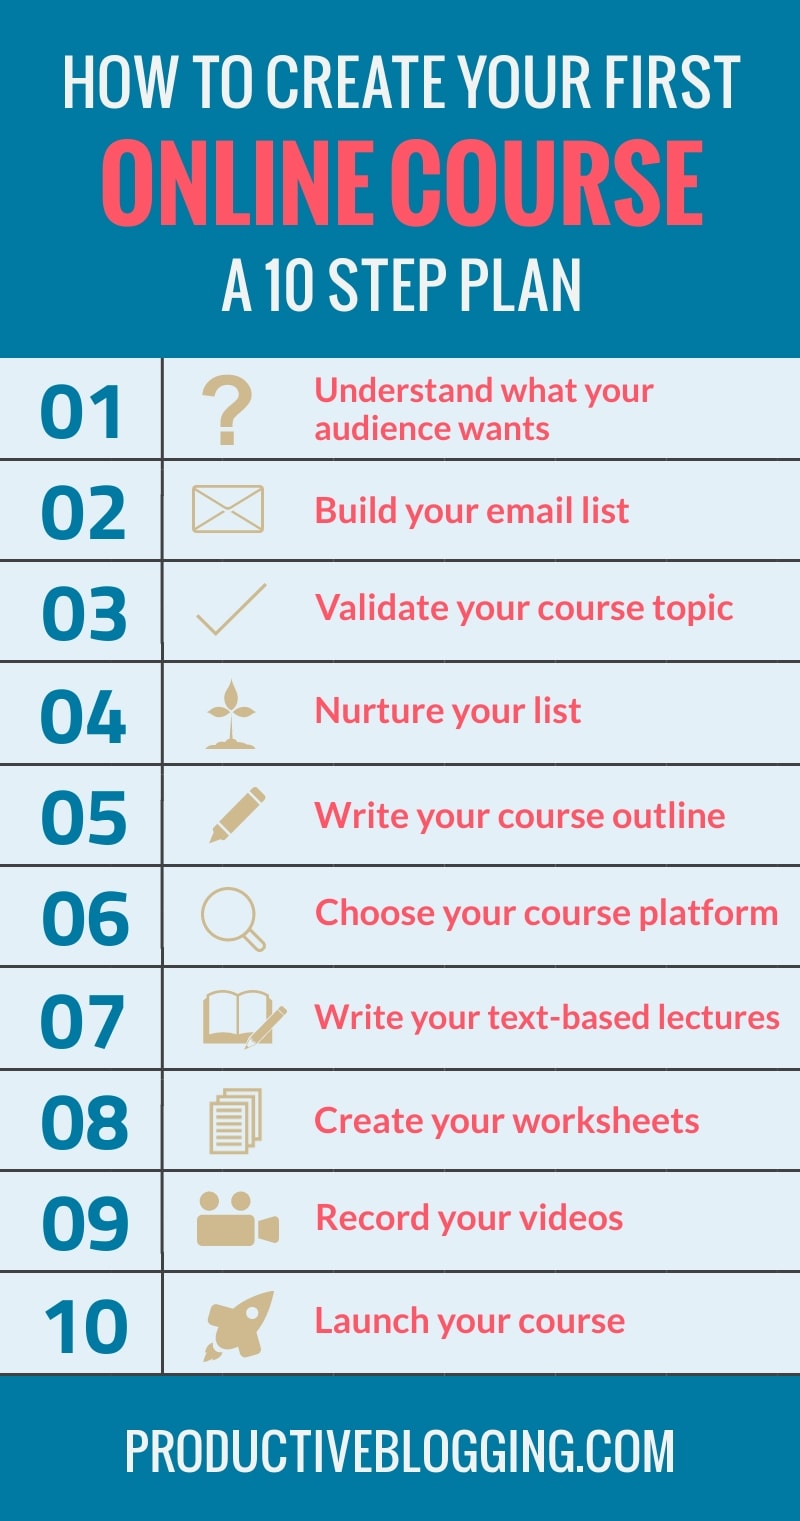 Online courses are HUGE right now. But how do you get started? Here’s my 10 step plan to help you create your first online course…#onlinecourse #digitalcourse #coursecreation #onlinecoursecreation #digitalcoursecreation #digitalproduct #teachable #coursecreator #digitallearning #digitaleducator #bloggingformoney #makemoneyblogging #howdoblogsmakemoney #passiveincome #treatitlikeabusiness #businessblogging #bizblogging #bloggingtips #productiveblogging